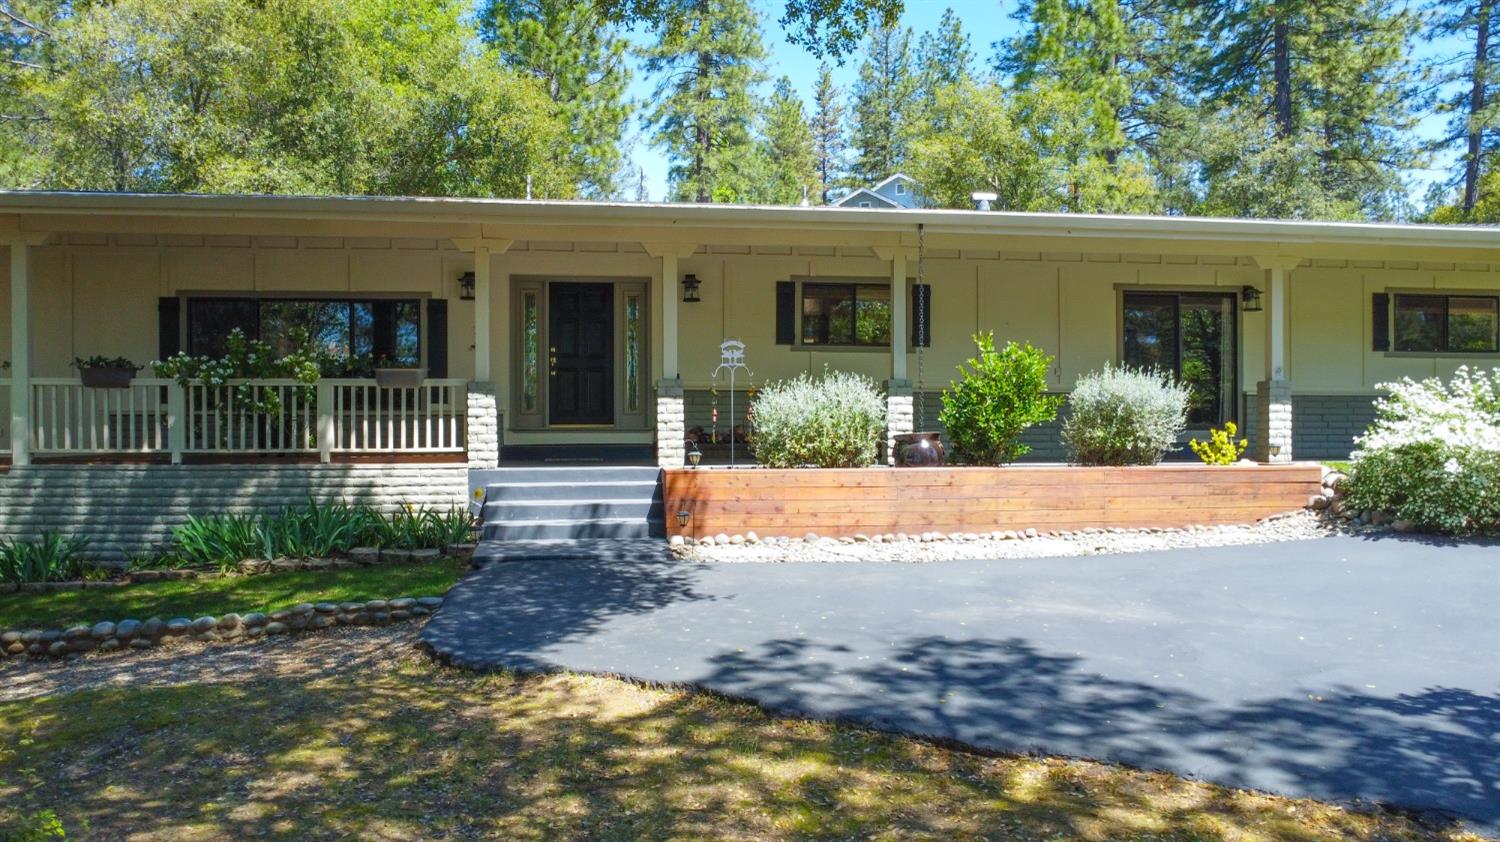 Photo of 1066 Kimi Wy in Placerville, CA